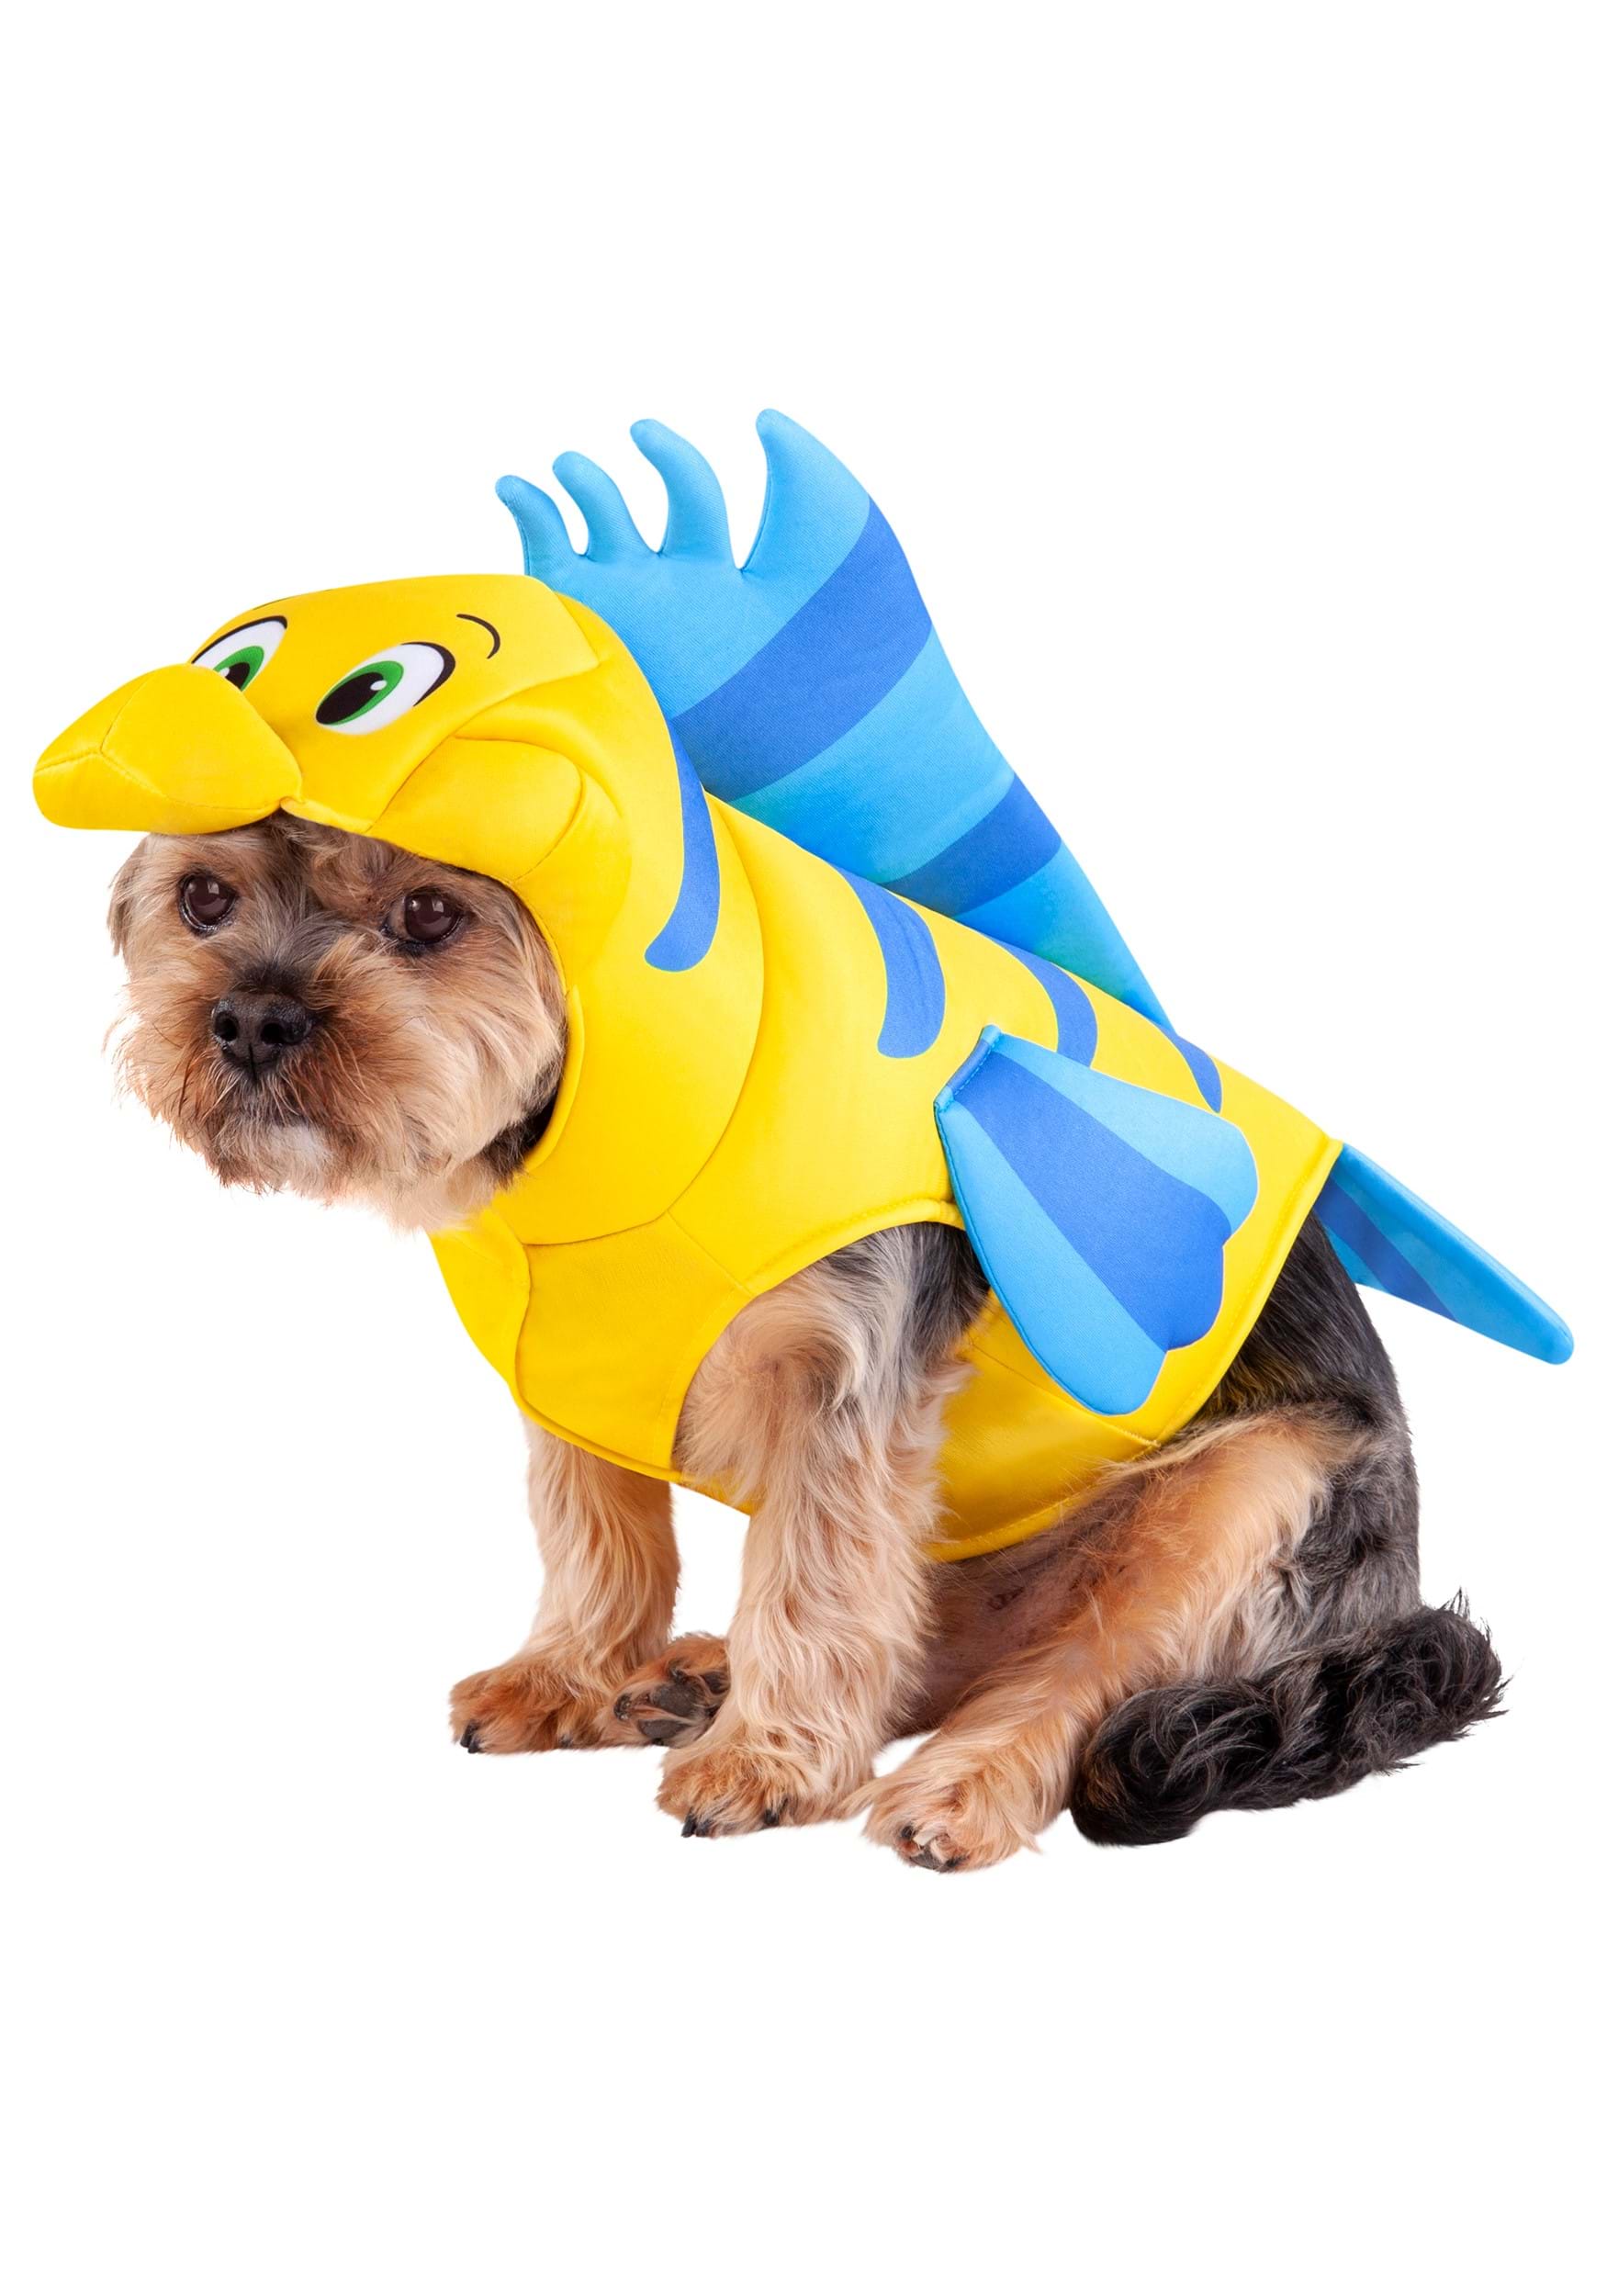 Disney Dog Costumes for Halloween - Highlights Along the Way